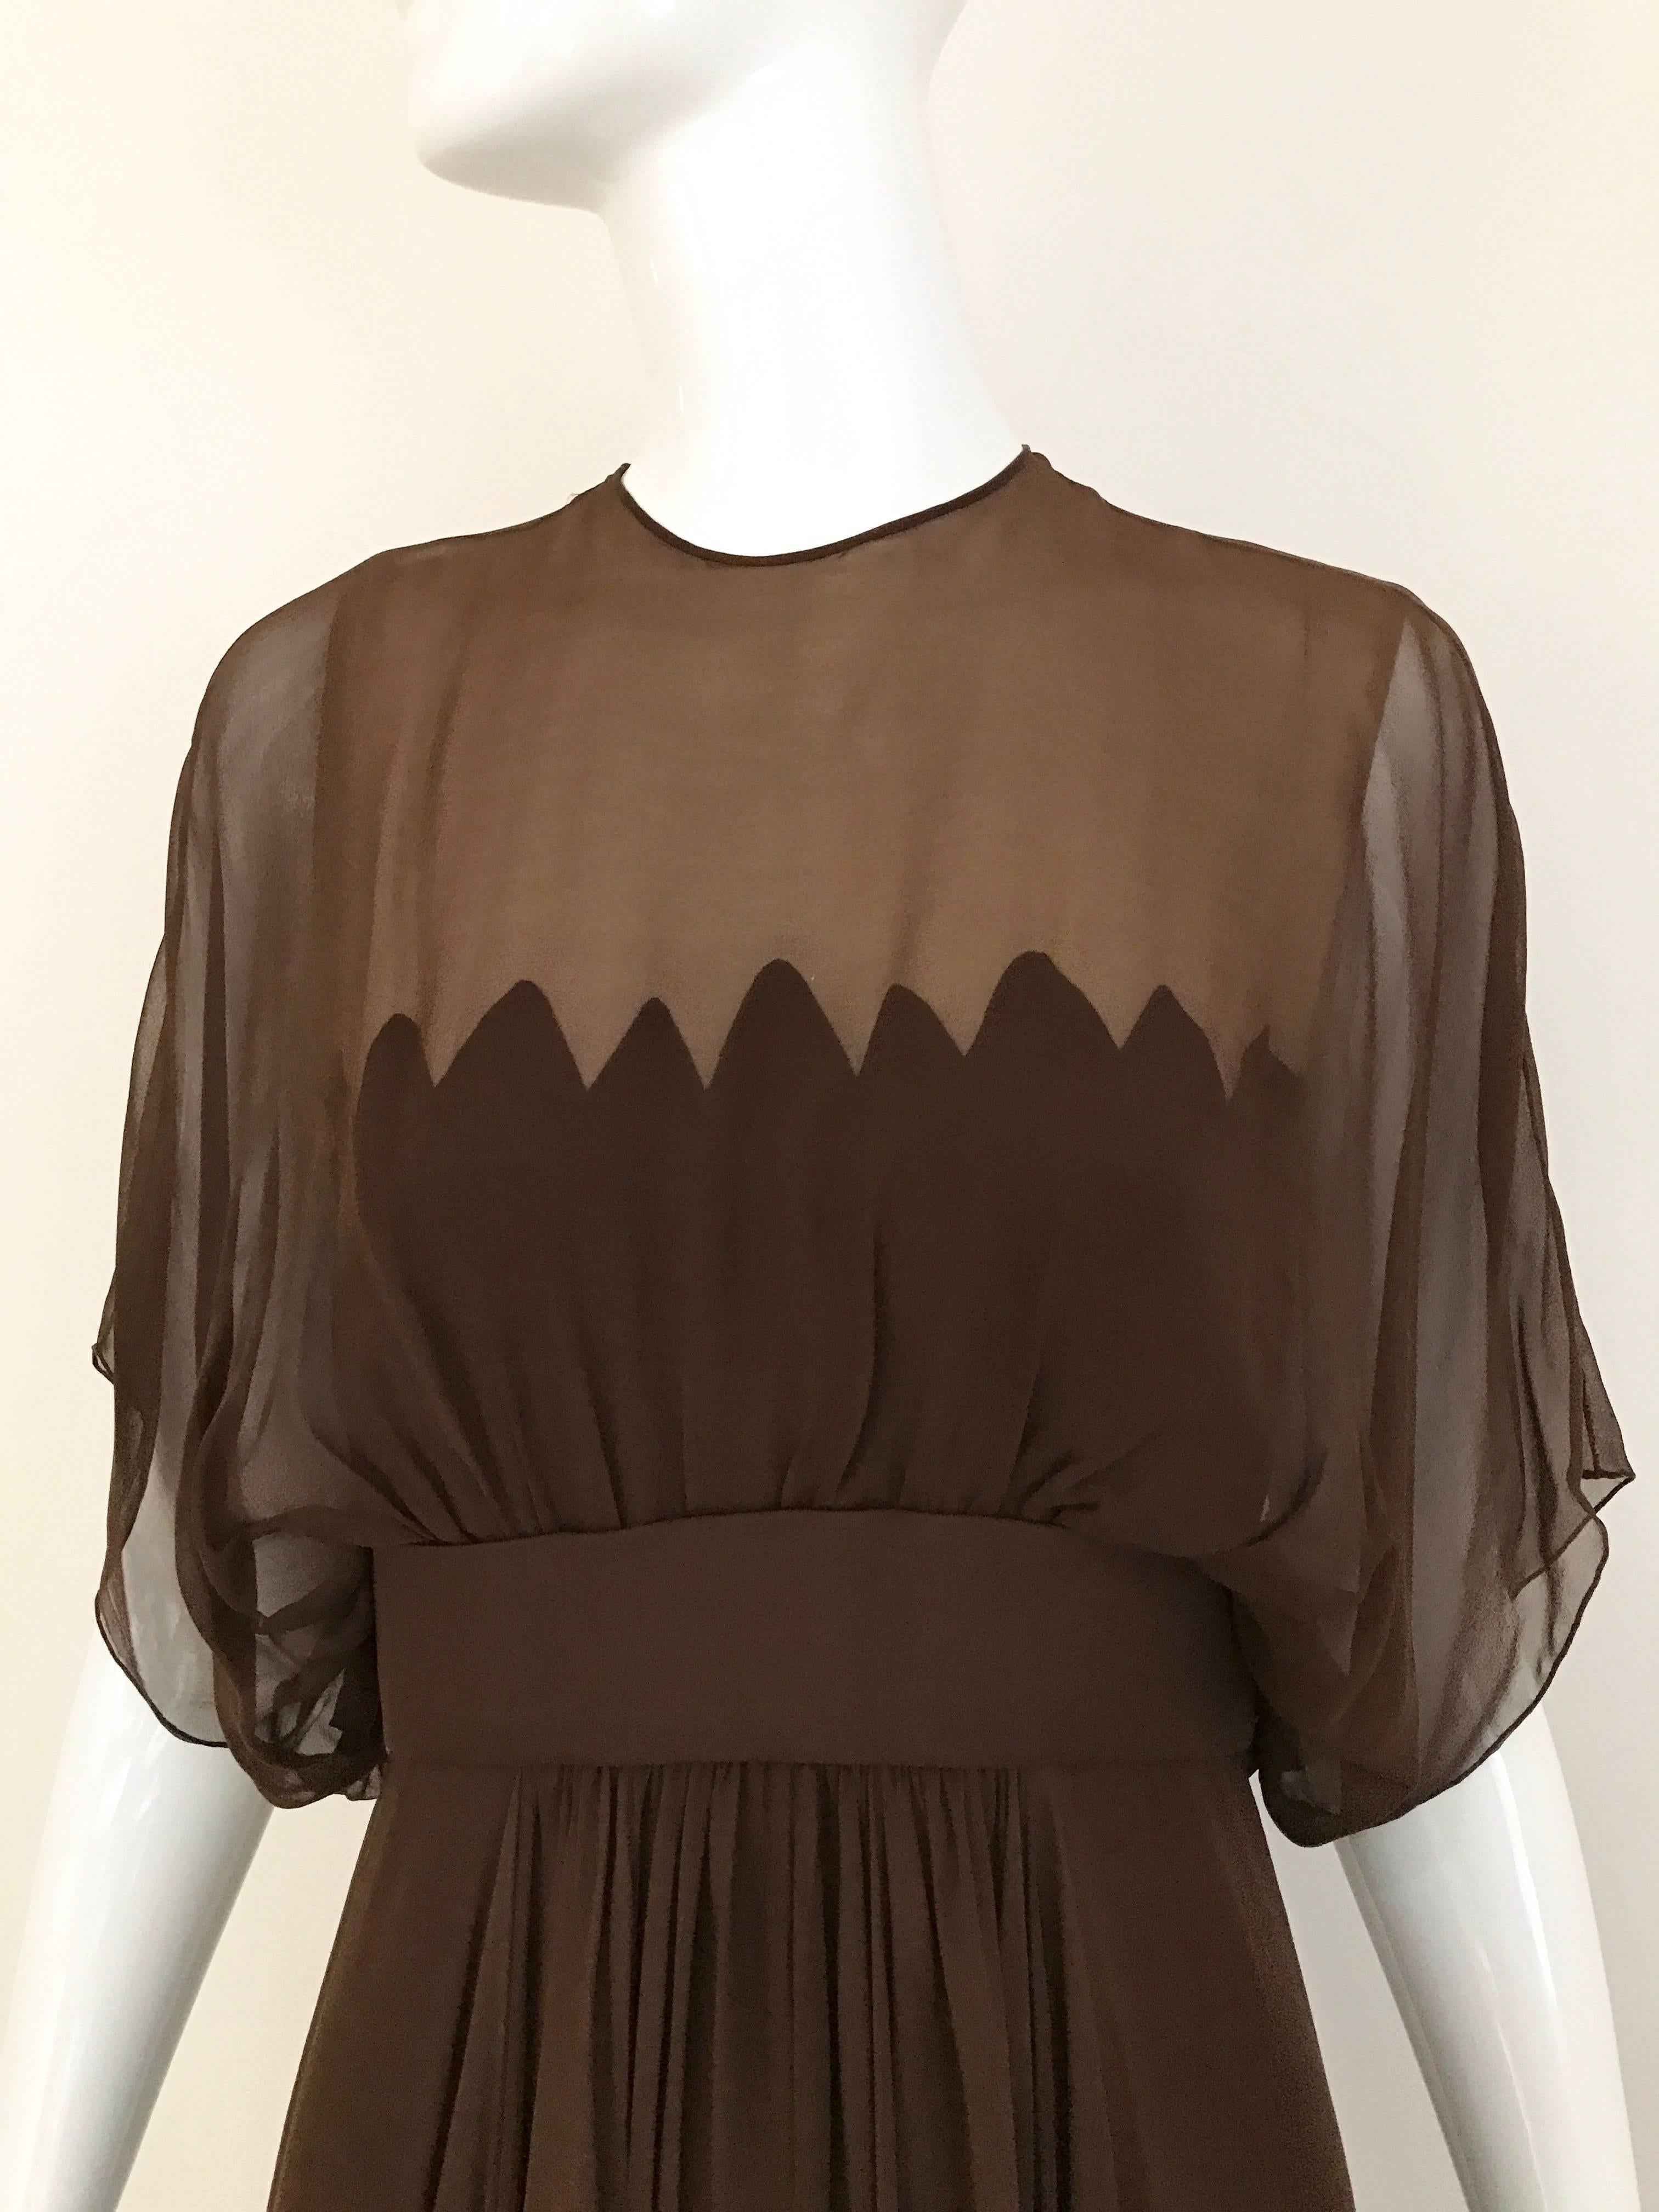 Beautiful Vintage Alfred Bosand 1950s cocktail dress with sheer bodice. Fitted on the waist with flowy skirt.  
Fit US 2/4 XSMALL AND SMALL
Bust: 34 inch/  Waist: 26 inch

** slightly small discoloration at the hem see image. 
*** discoloration in